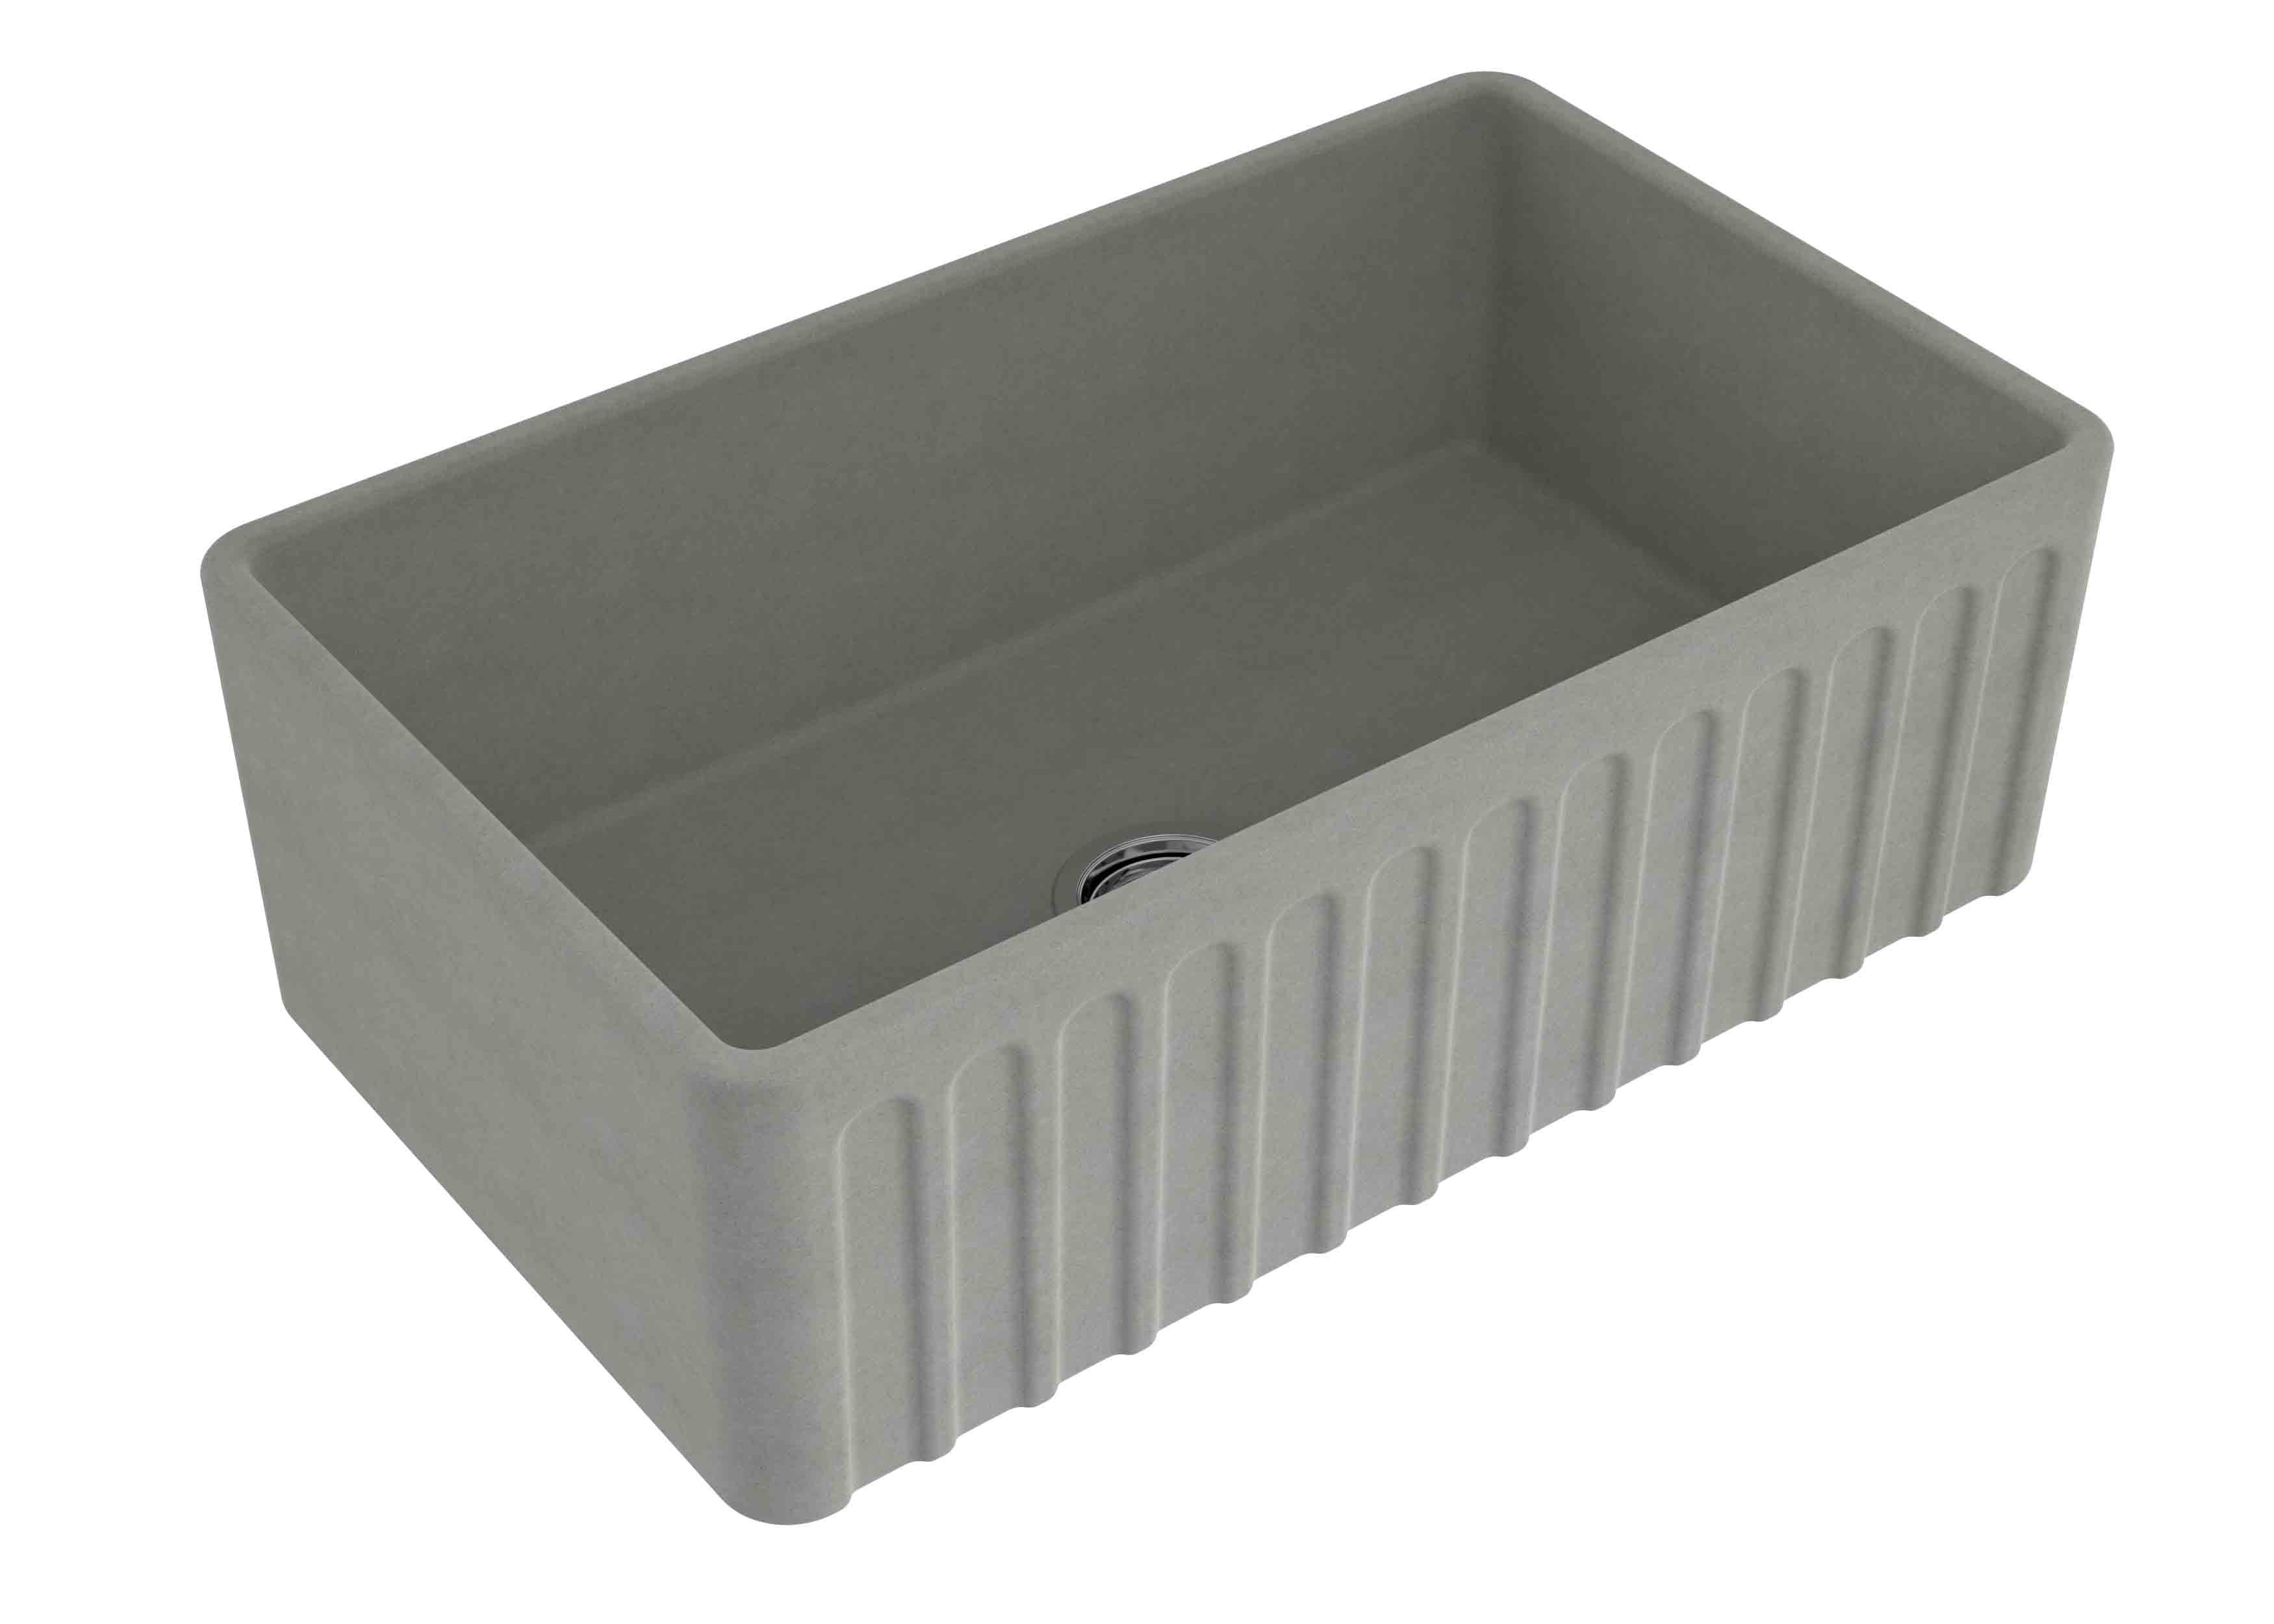 TURNER HASTINGS NOVI RIBBED FARMHOUSE BUTLER SINK WITH OVERFLOW CONCRETE LOOK 765MM